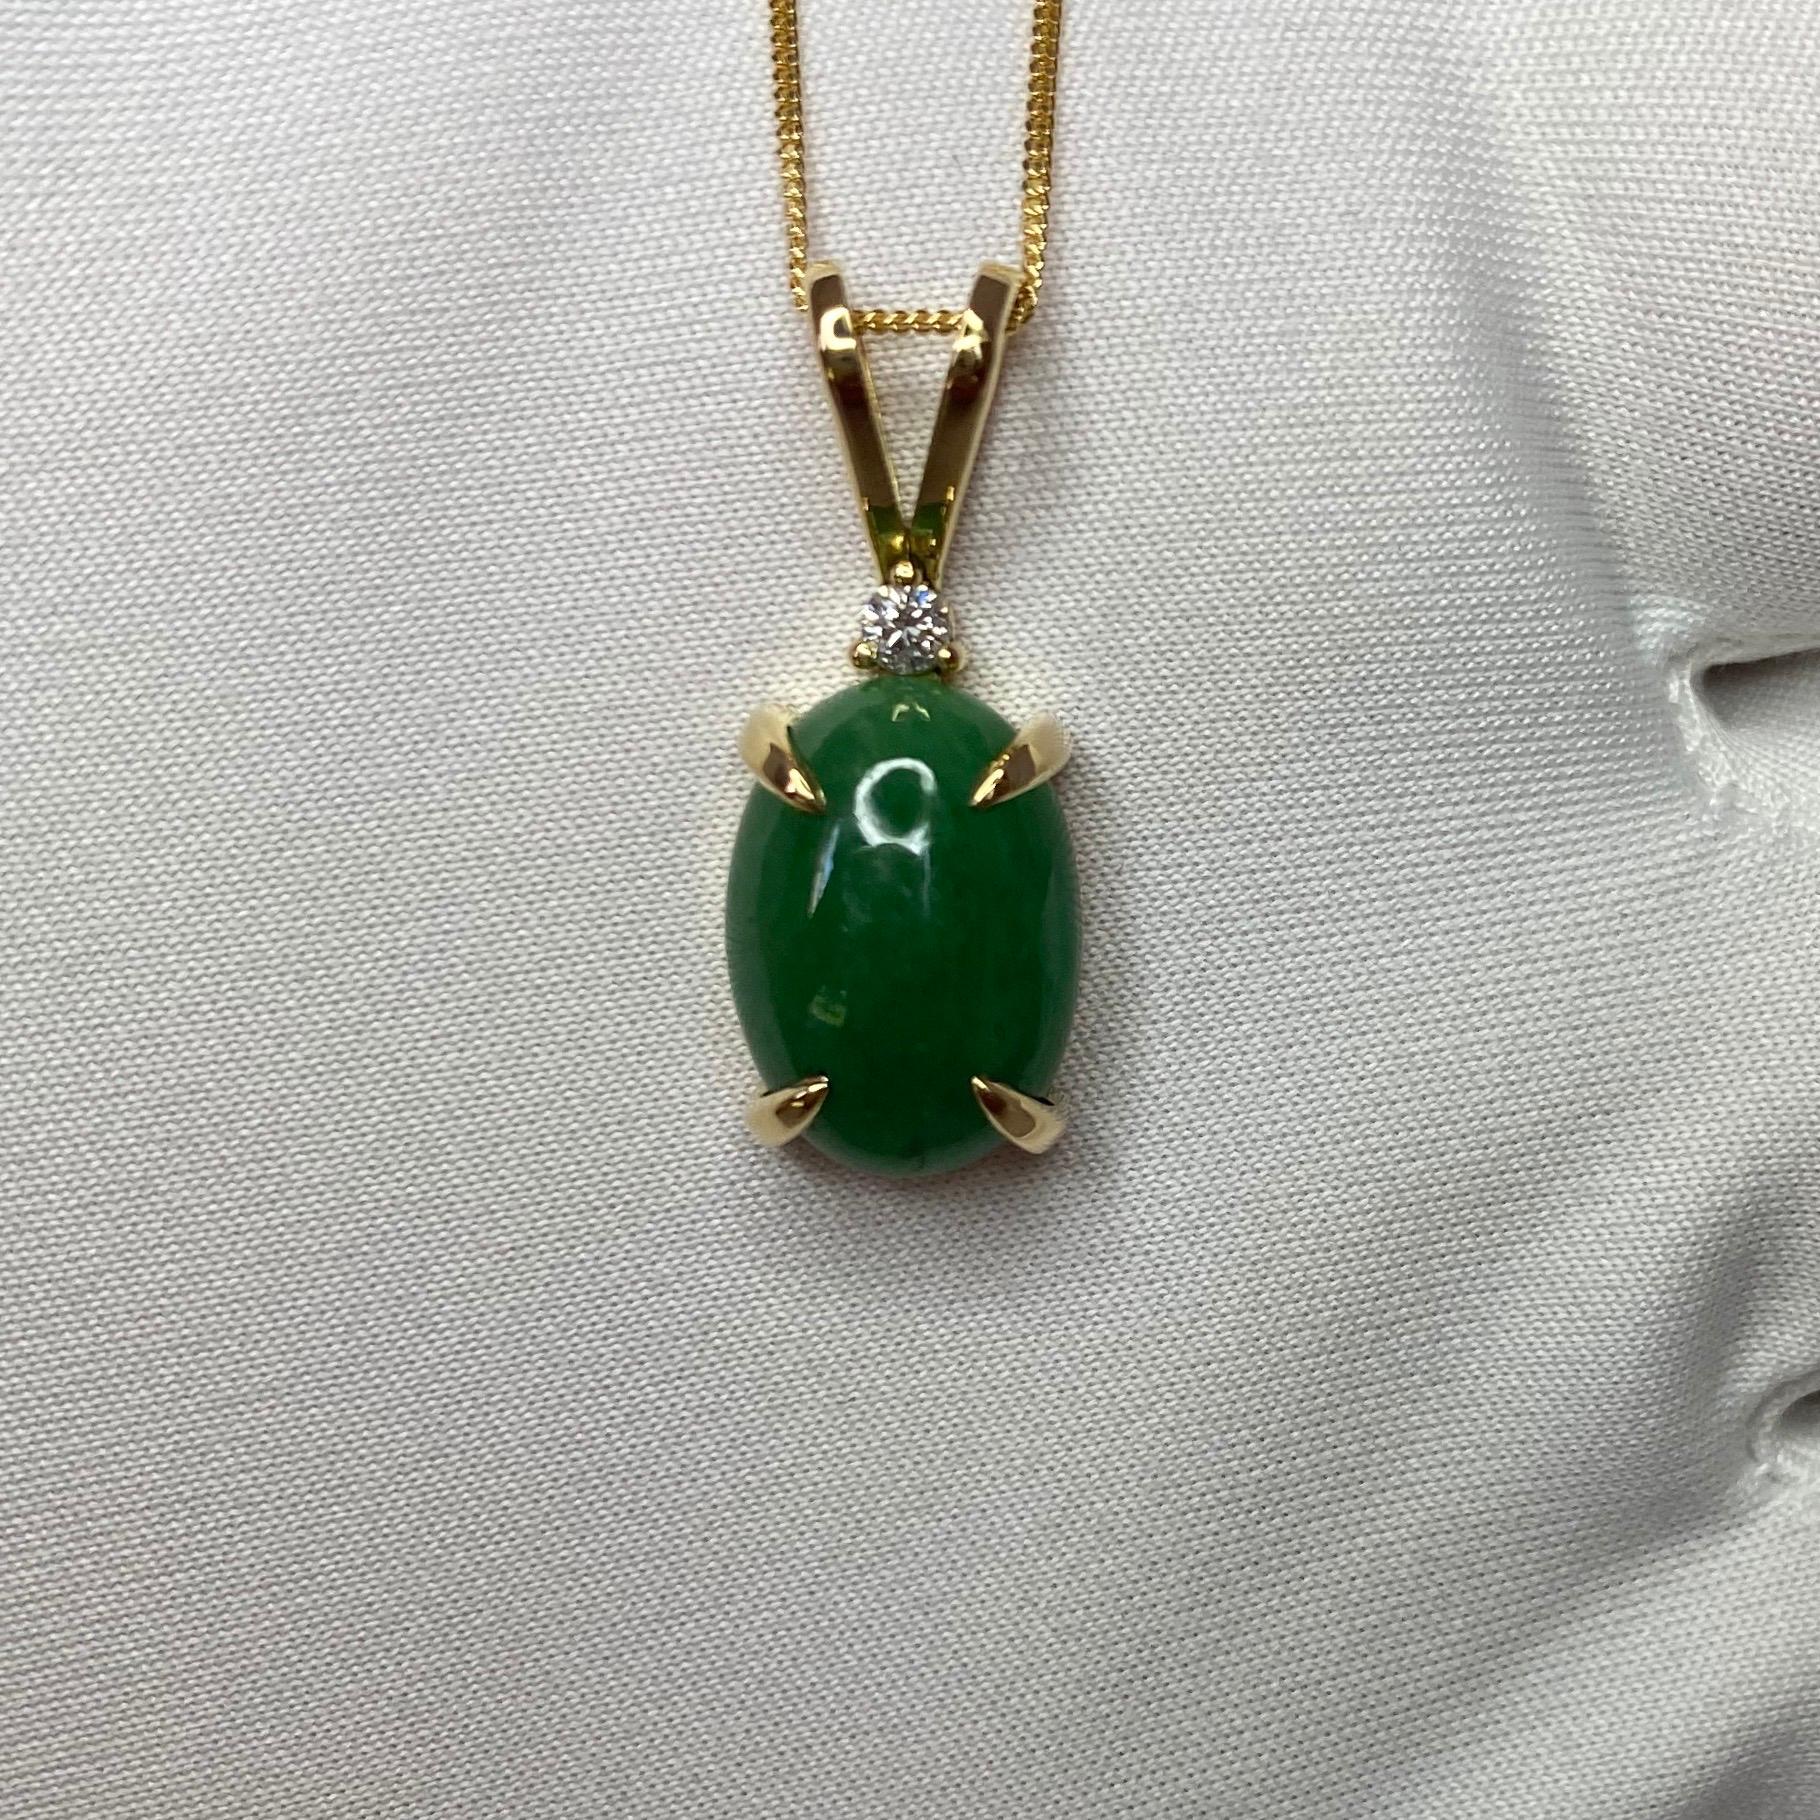 Women's or Men's x2 GIA Certified Jadeite 18k Pendants Custom Listing As in messages - No Chains